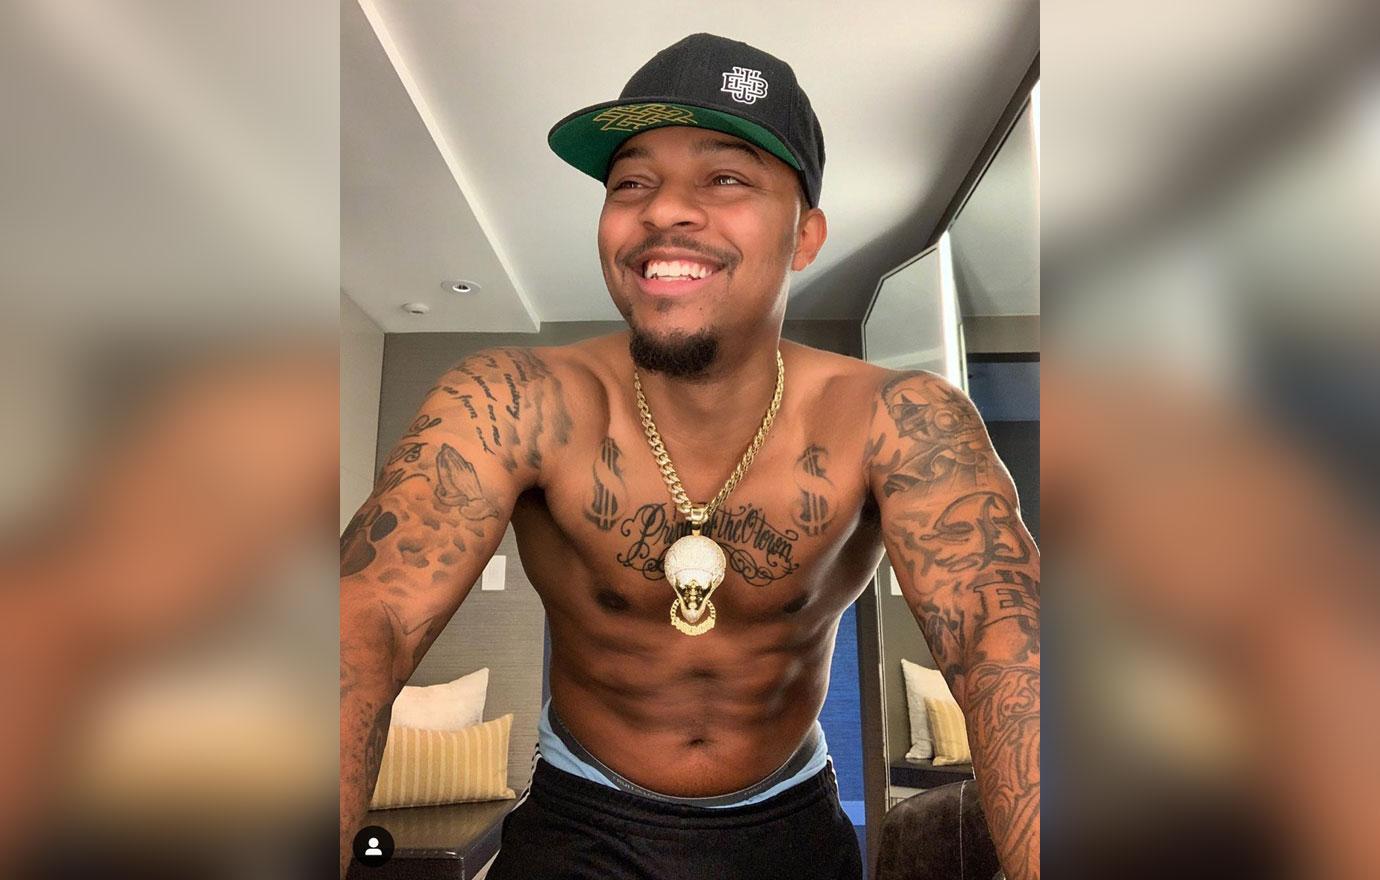 doug stutzman recommends bow wow nude pic